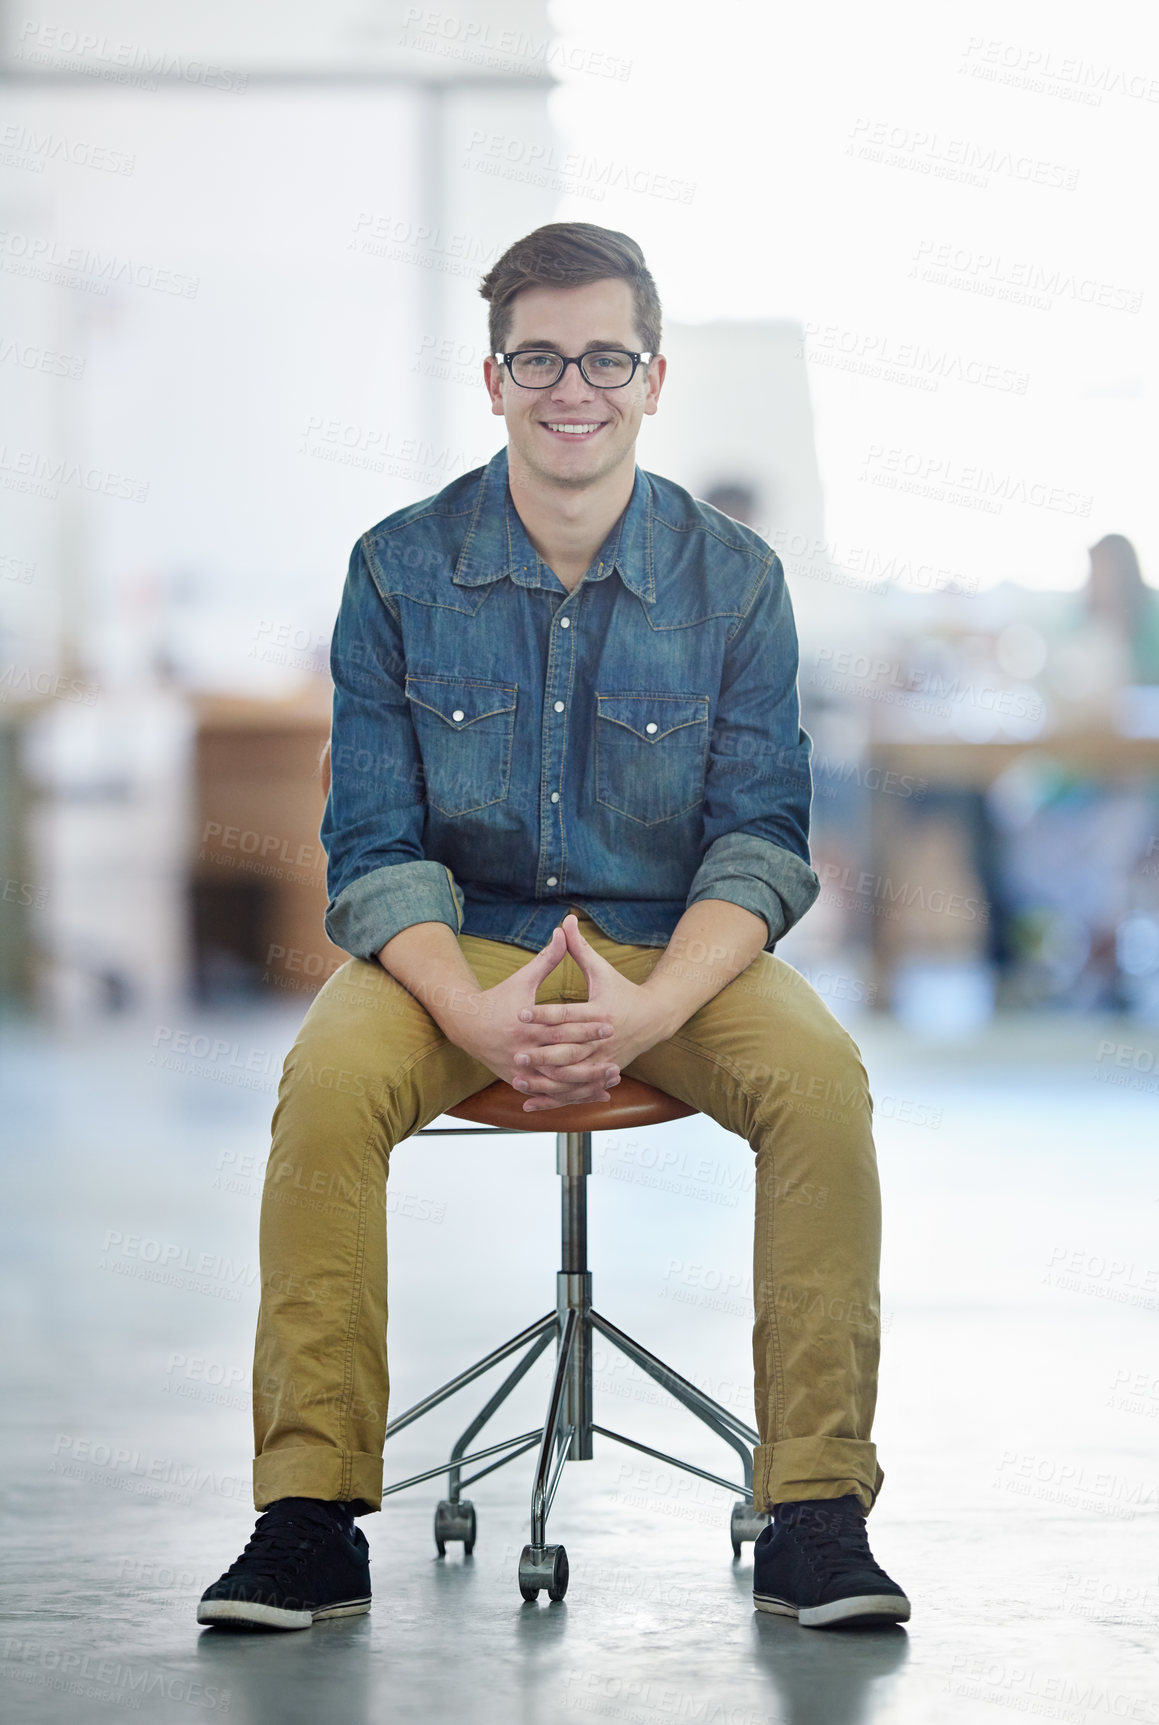 Buy stock photo Portrait of a smiling young designer sitting on a chair in a large office